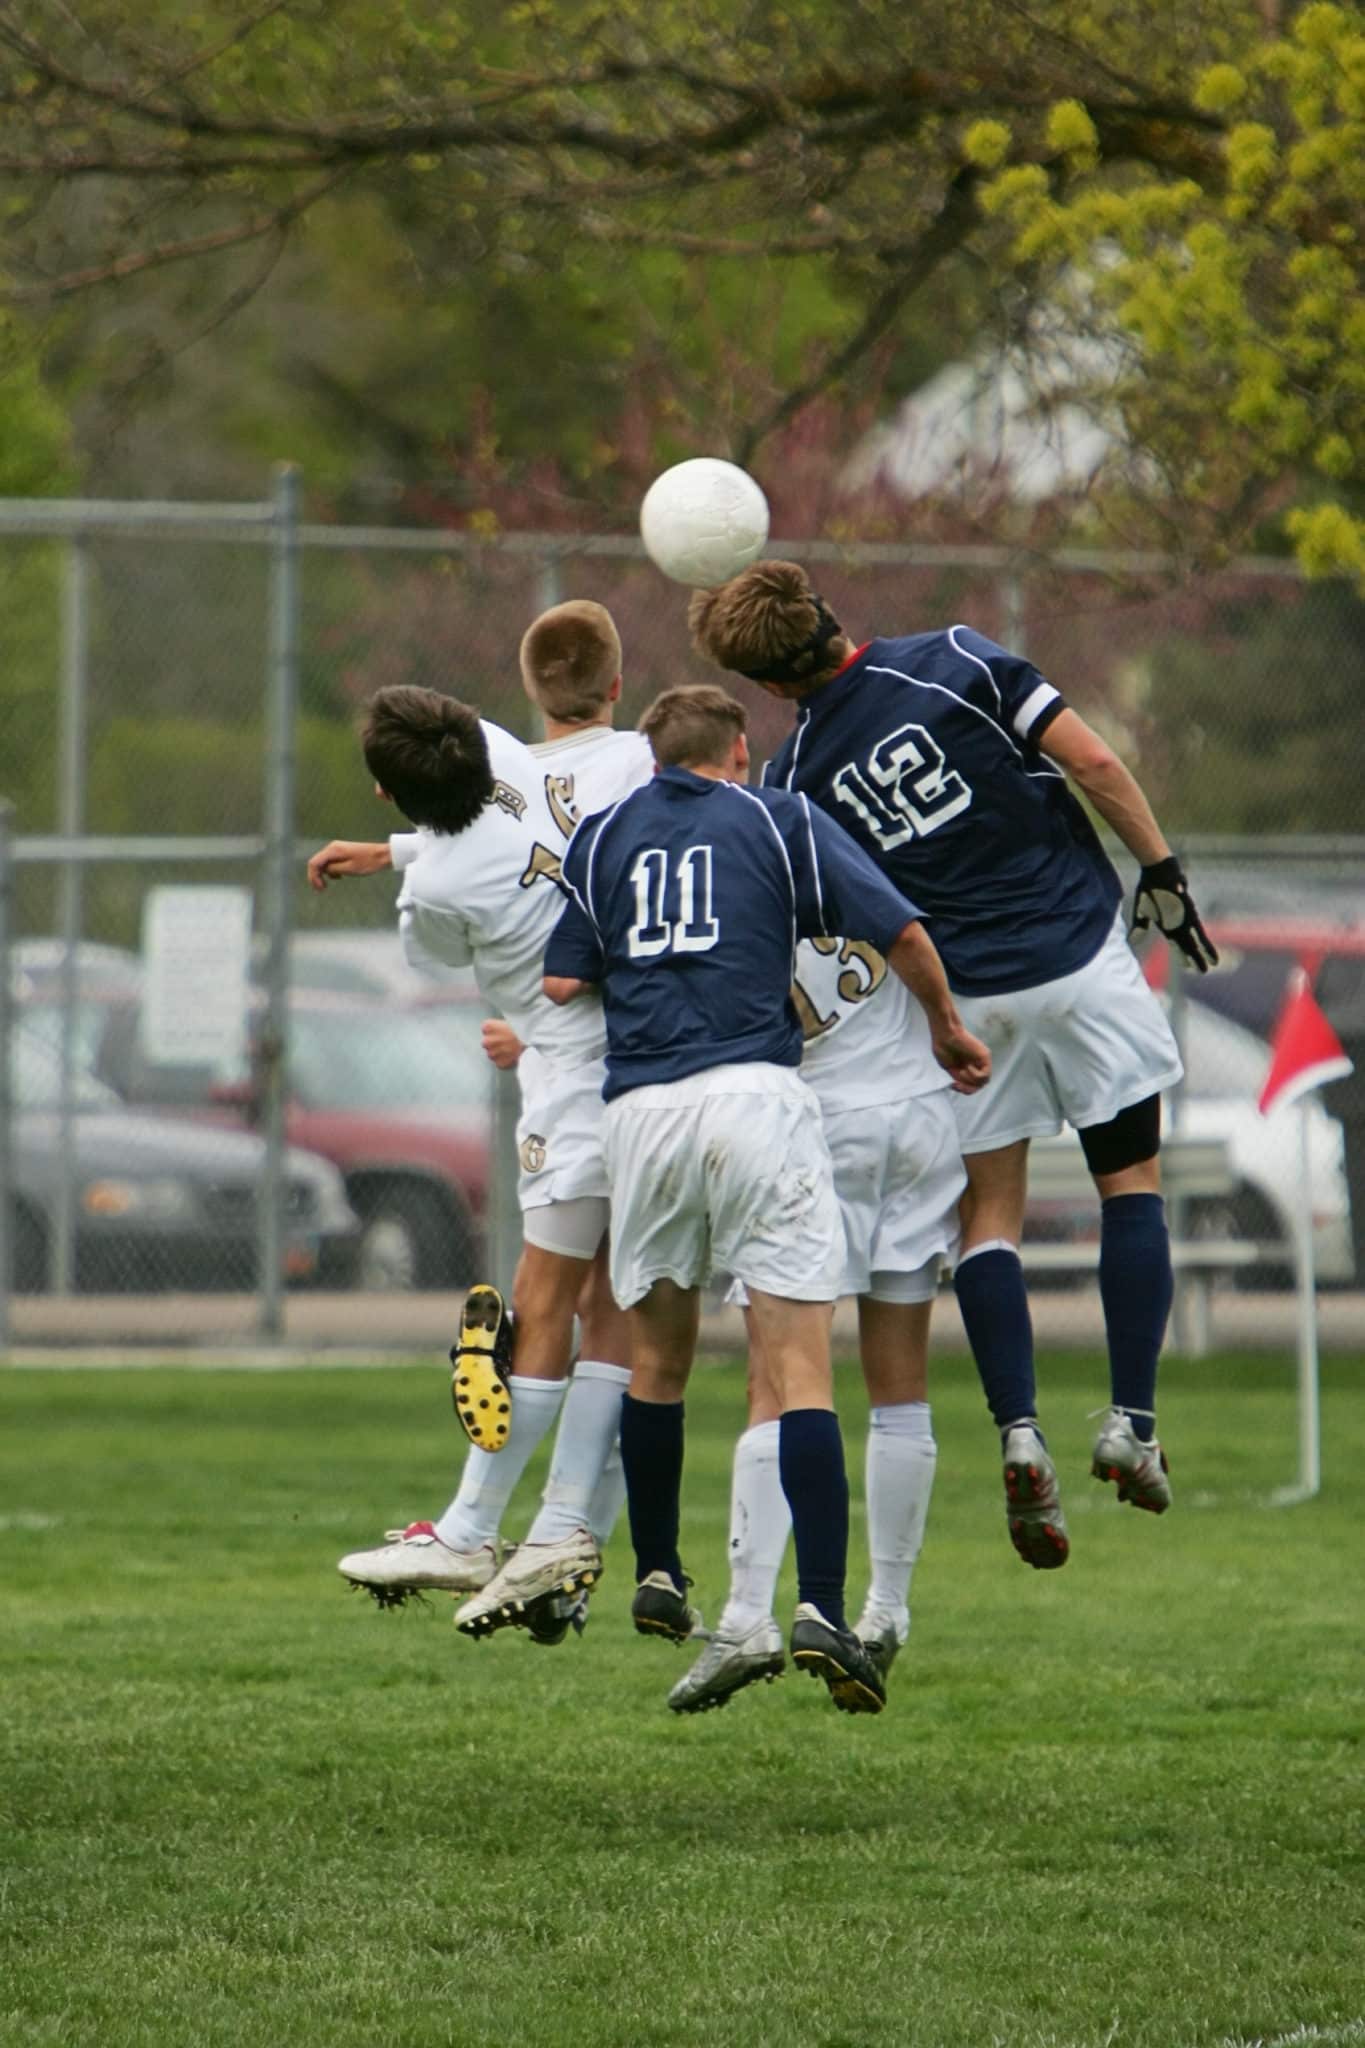 soccer players jumping for ball